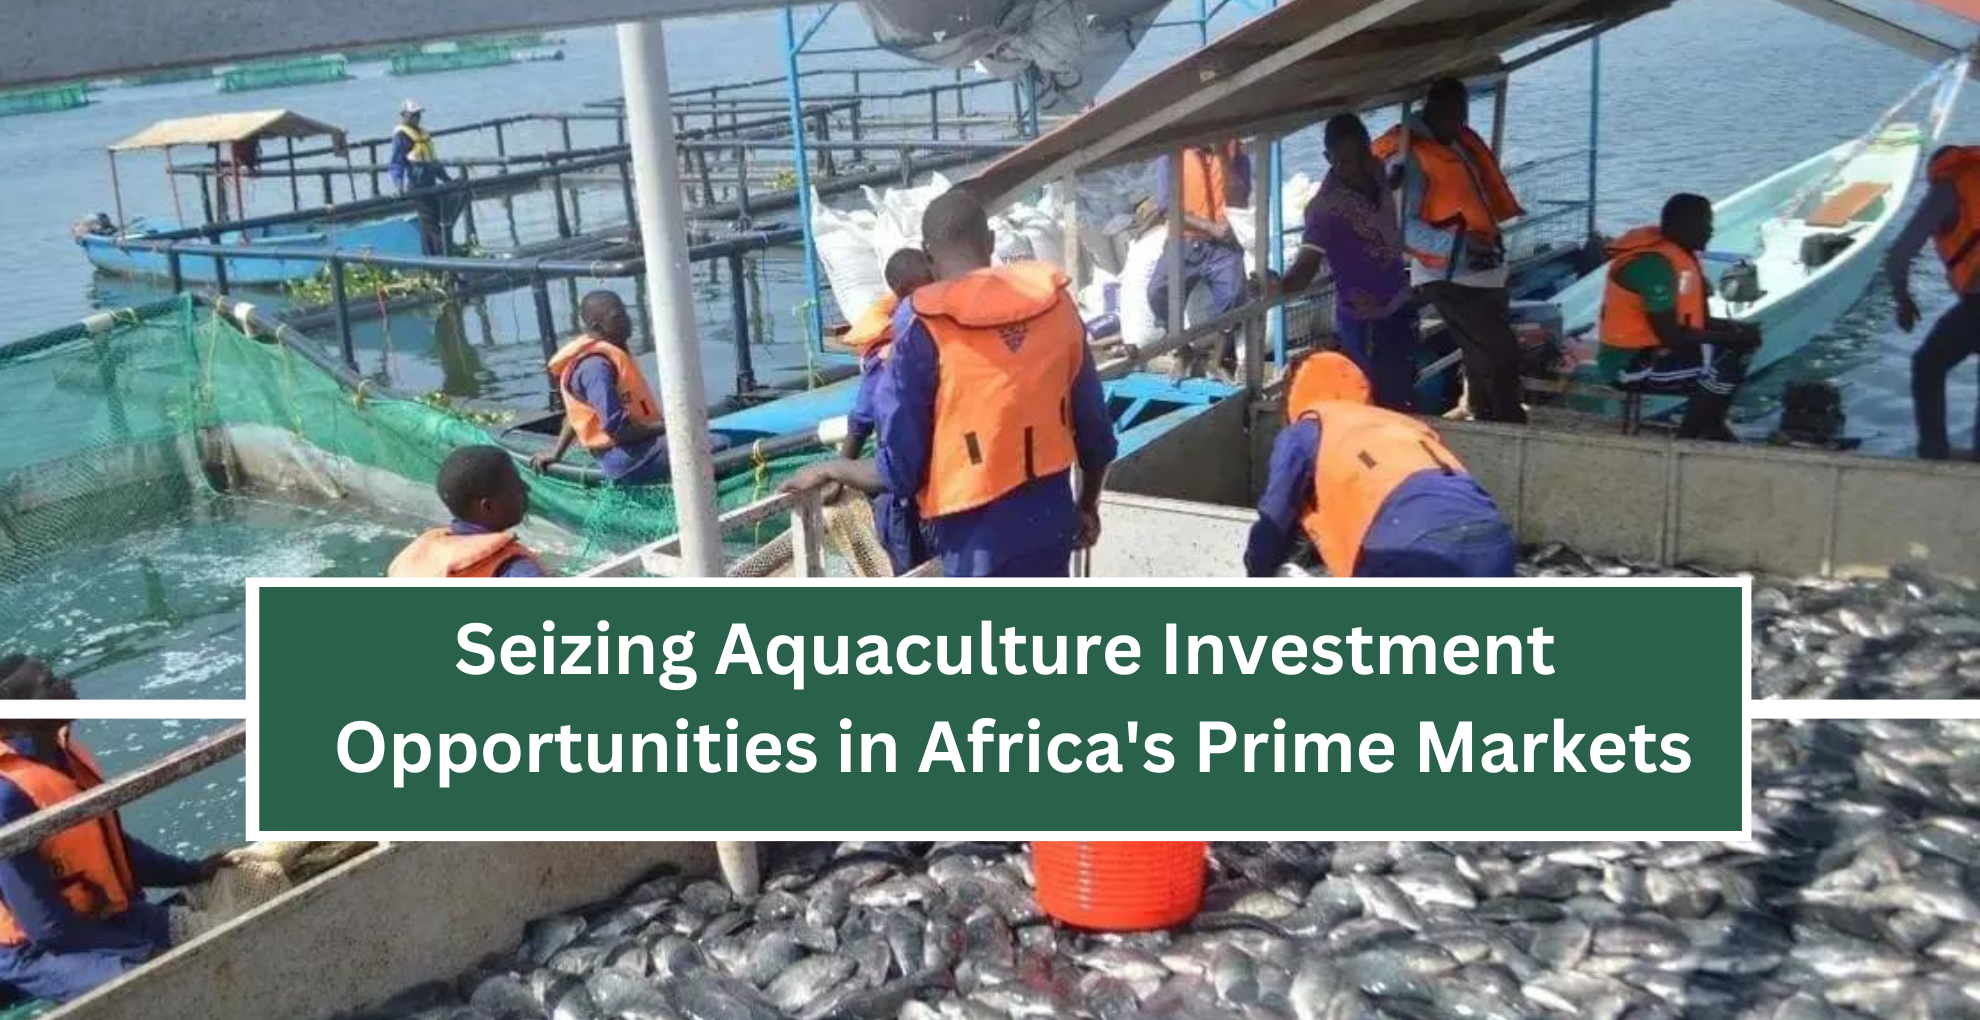 Seizing Aquaculture Investment Opportunities in Africa’s Prime Markets